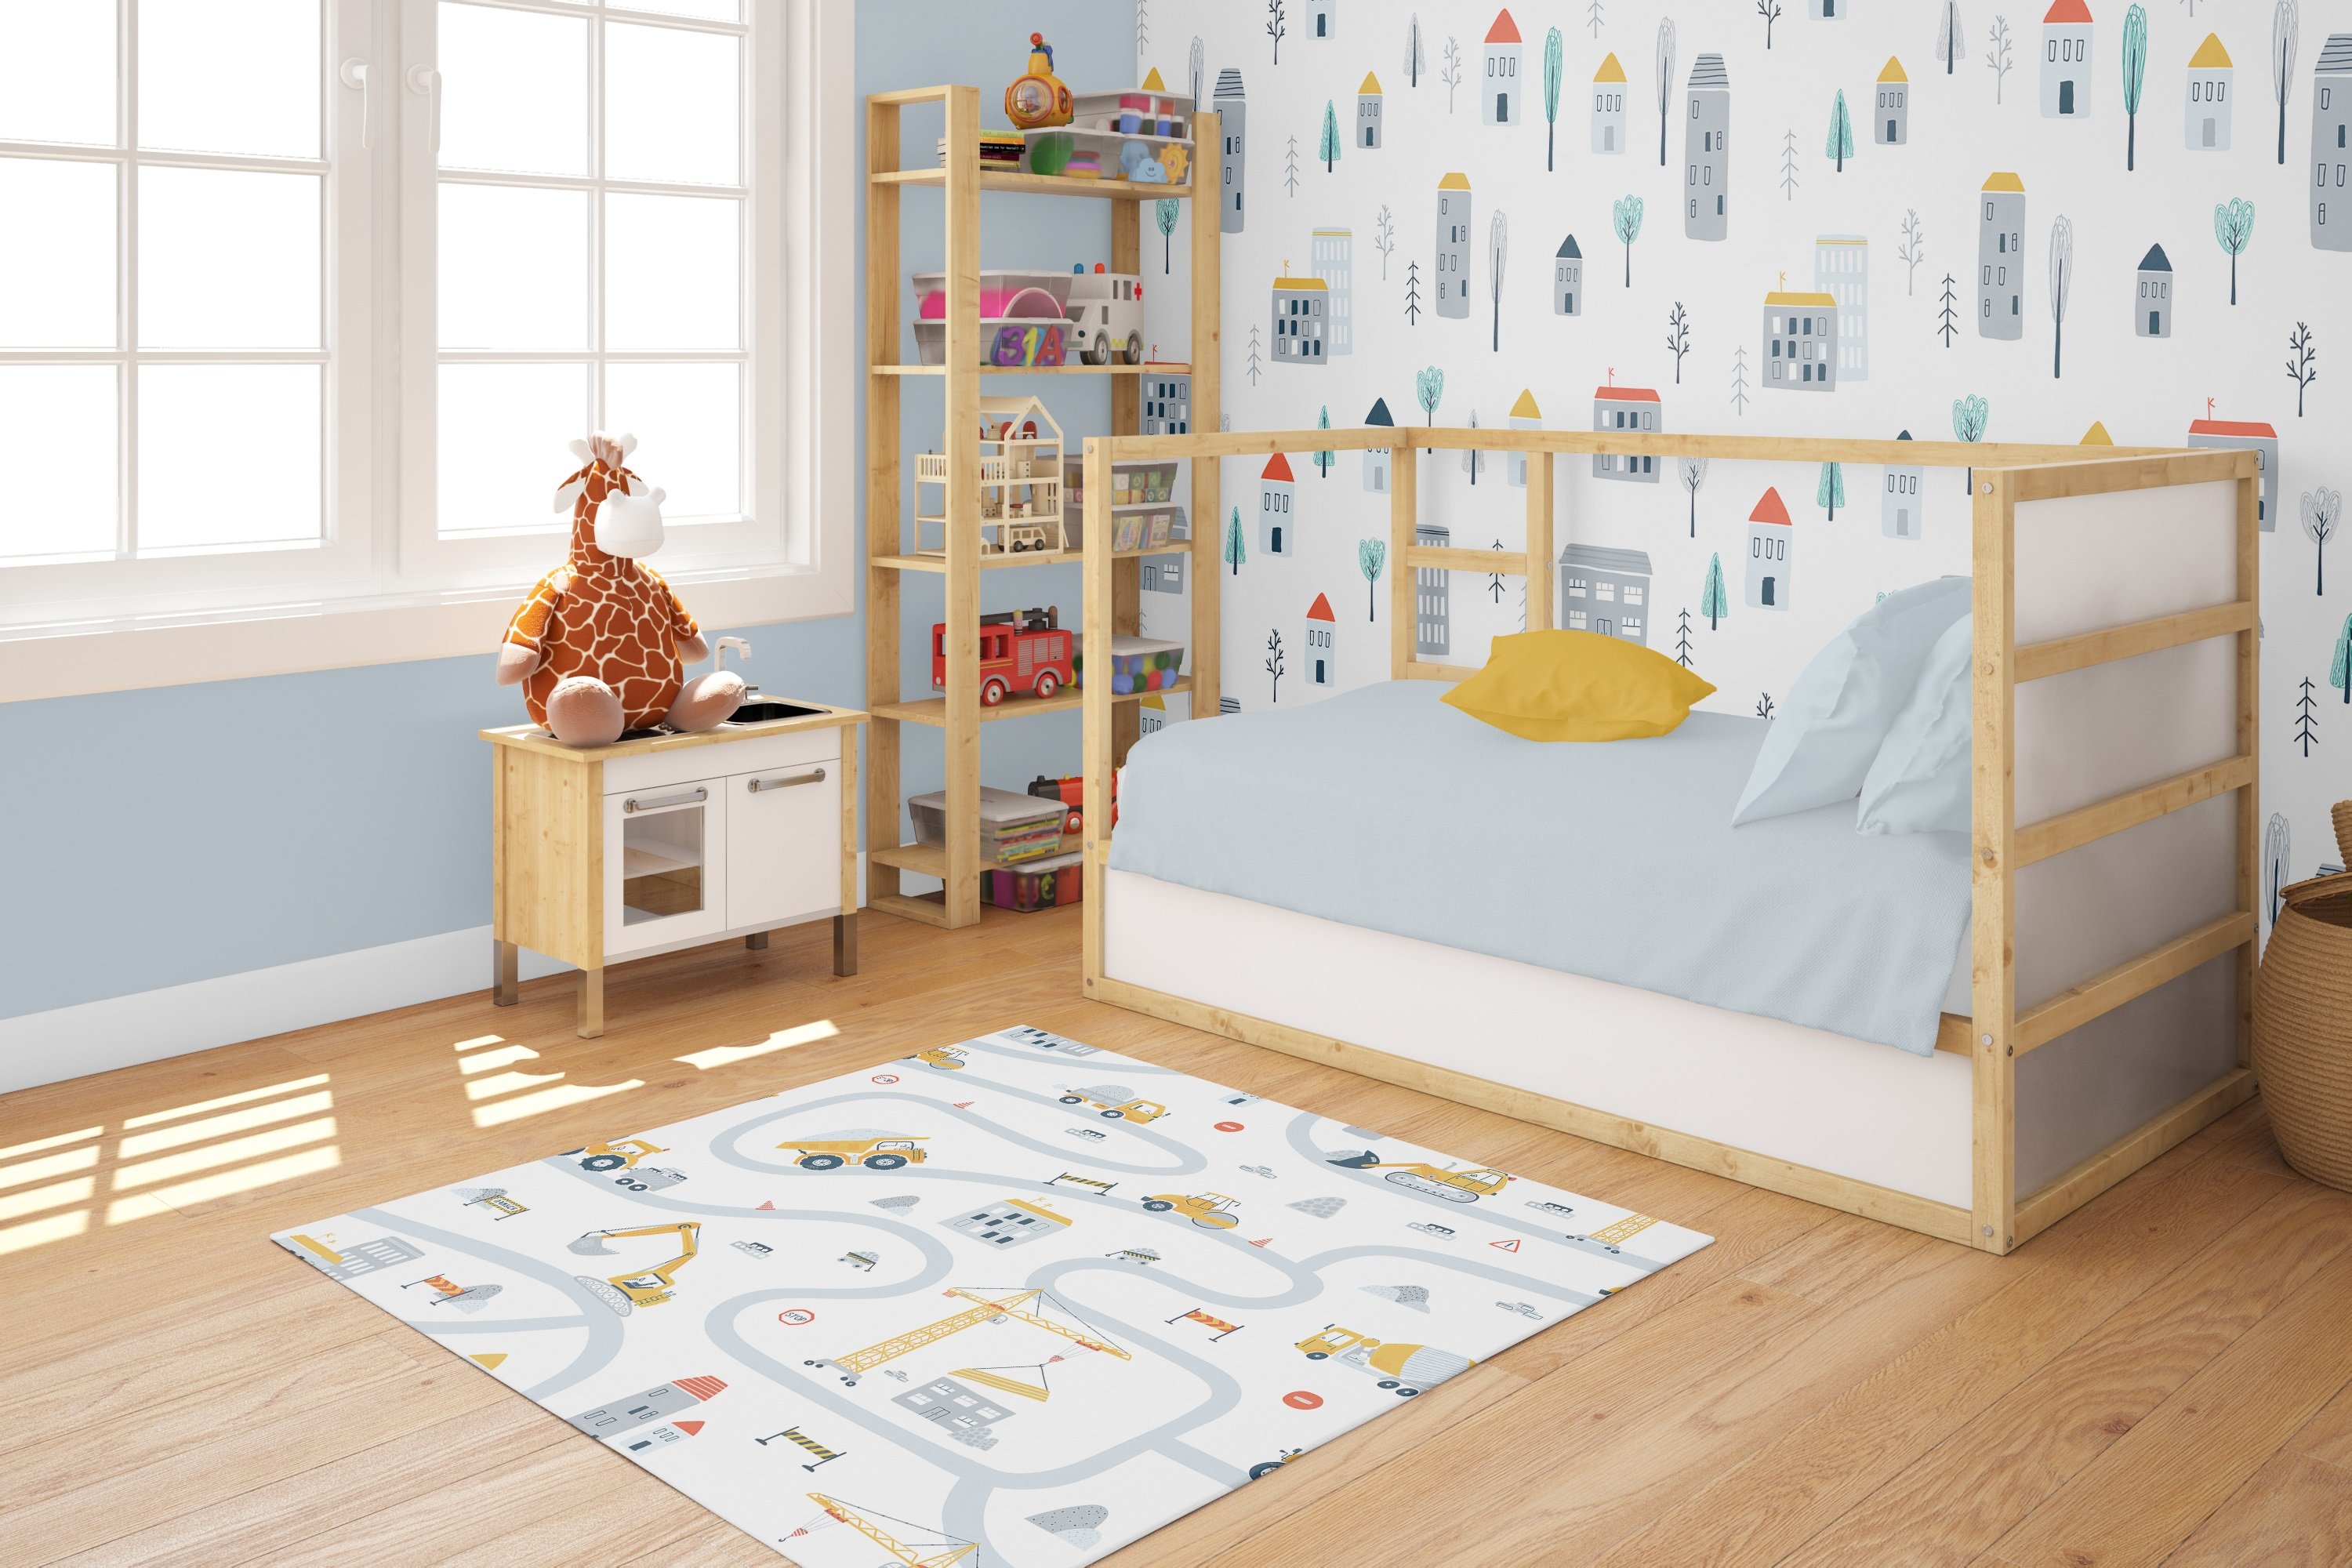 Wallpaper with in a kids room with cars.